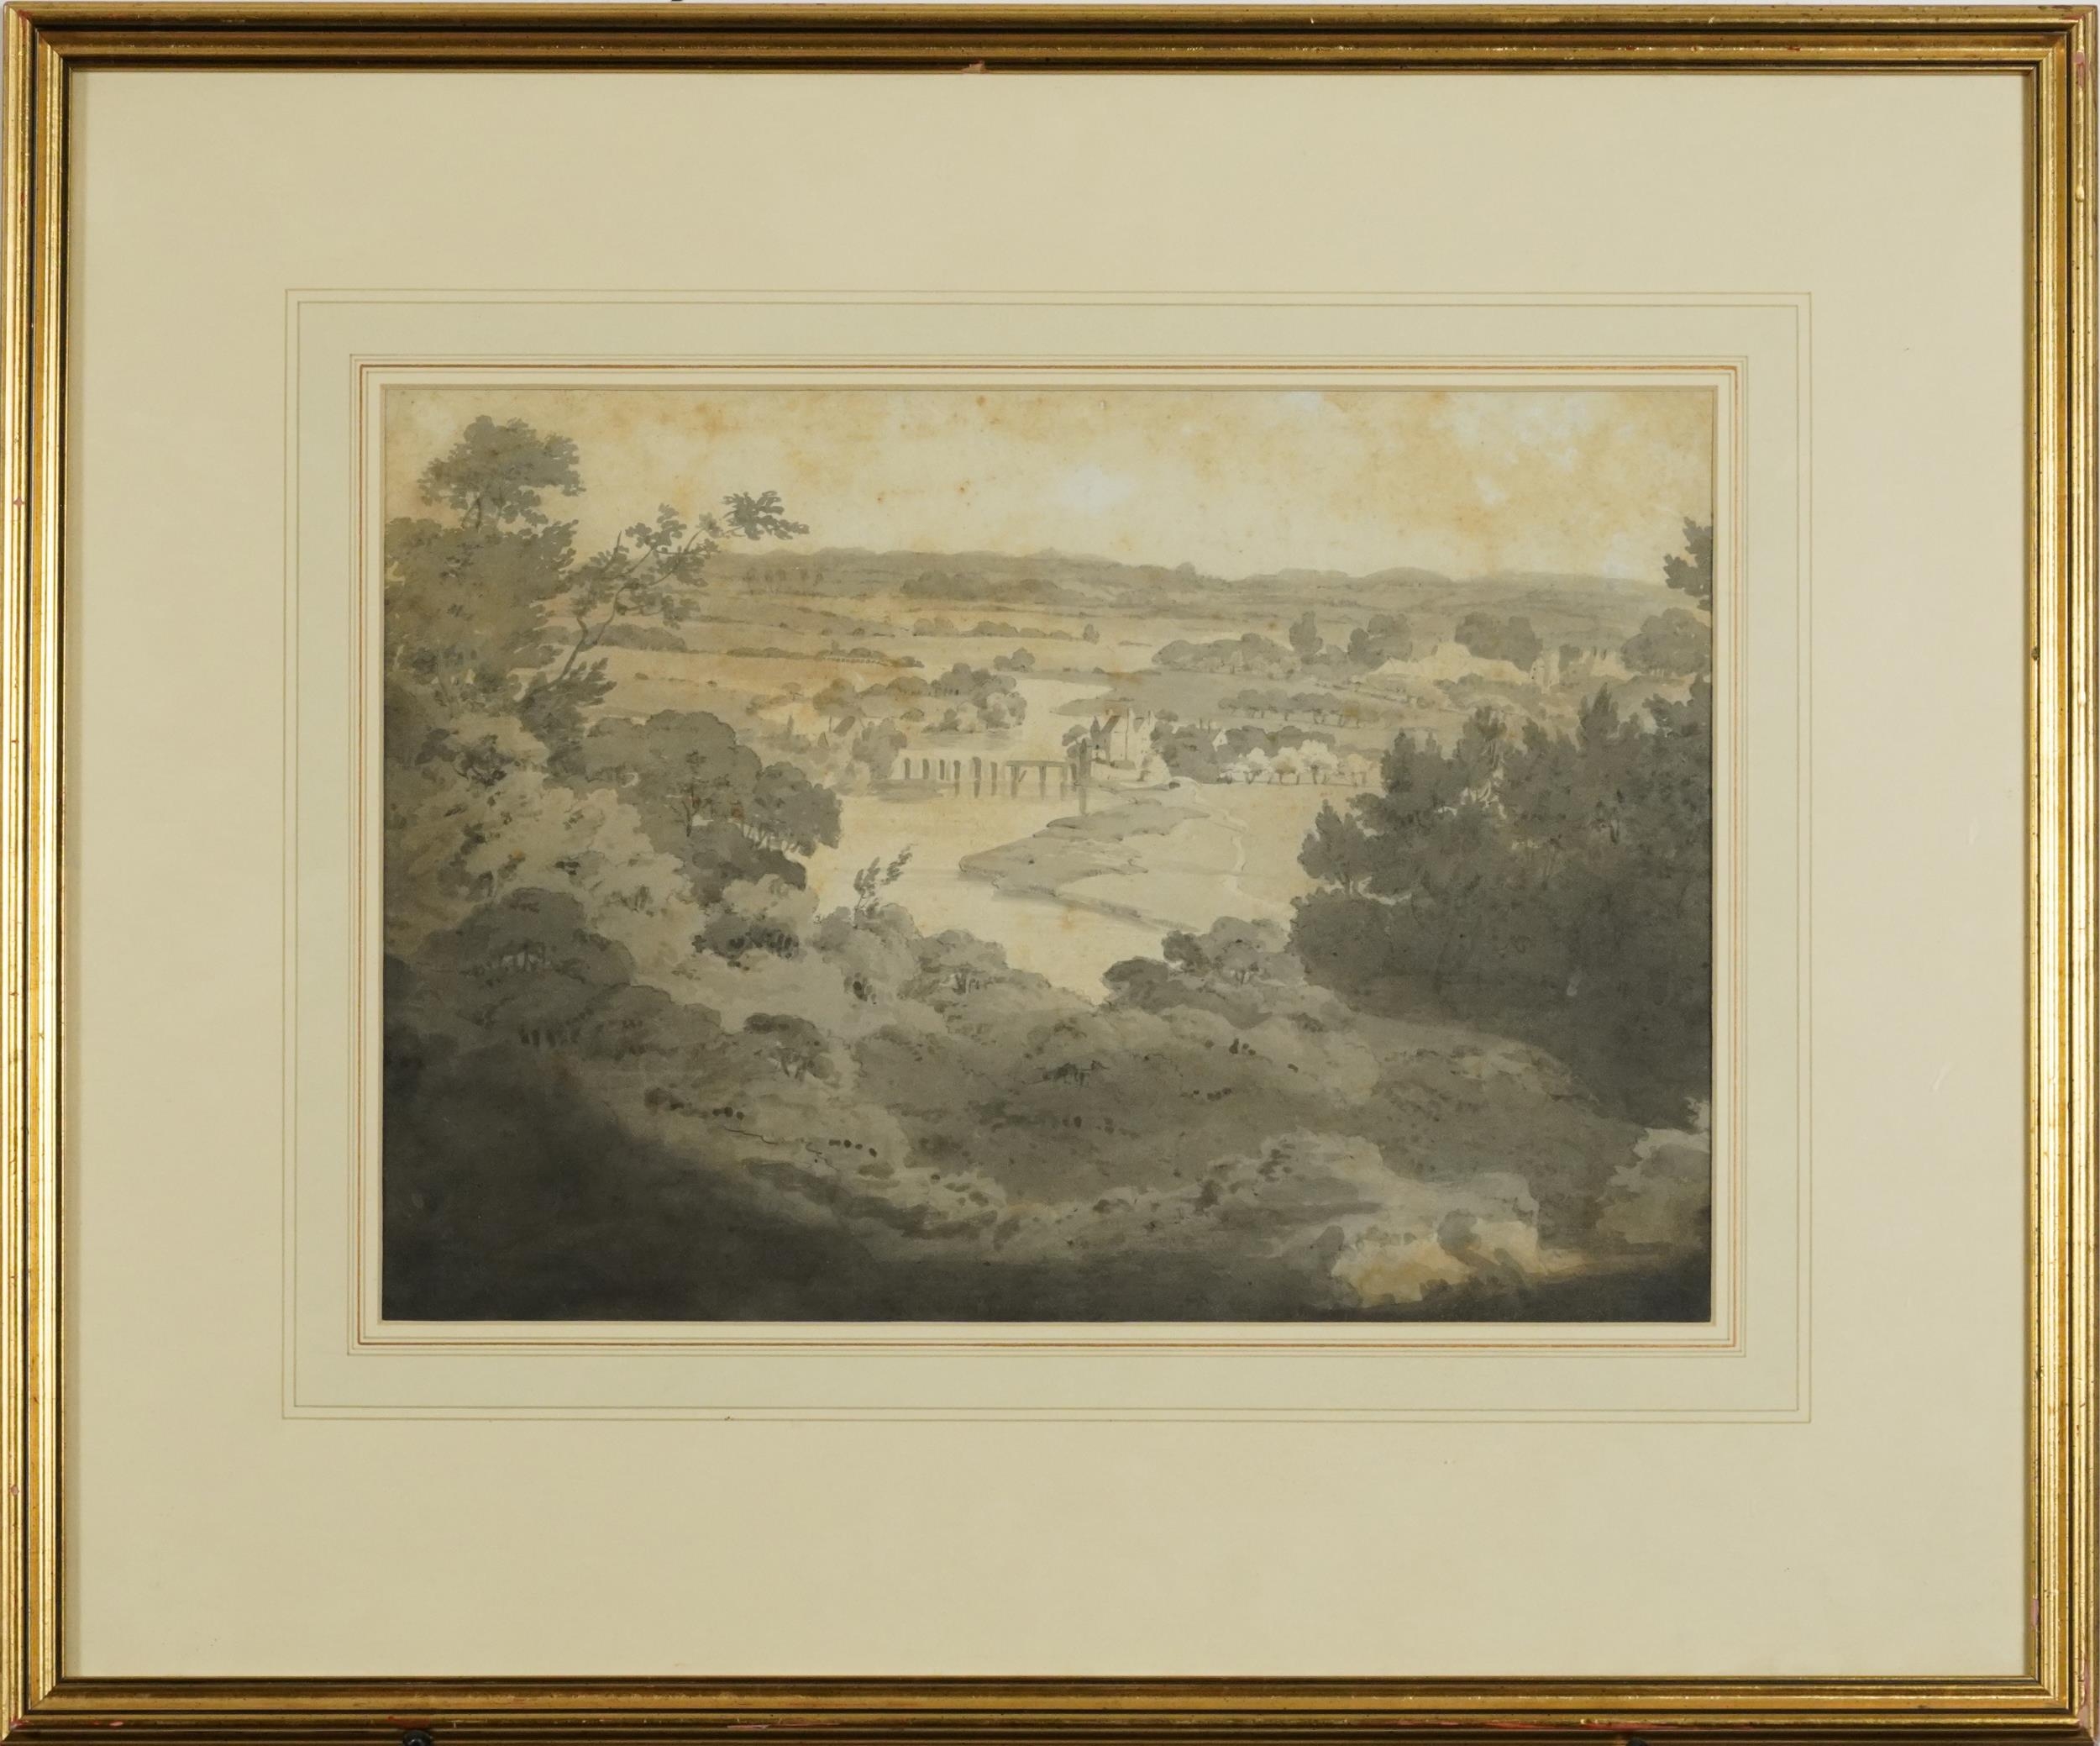 William Havell - Caversham Bridge, Reading, early 19th century English pencil and watercolour, - Image 2 of 4